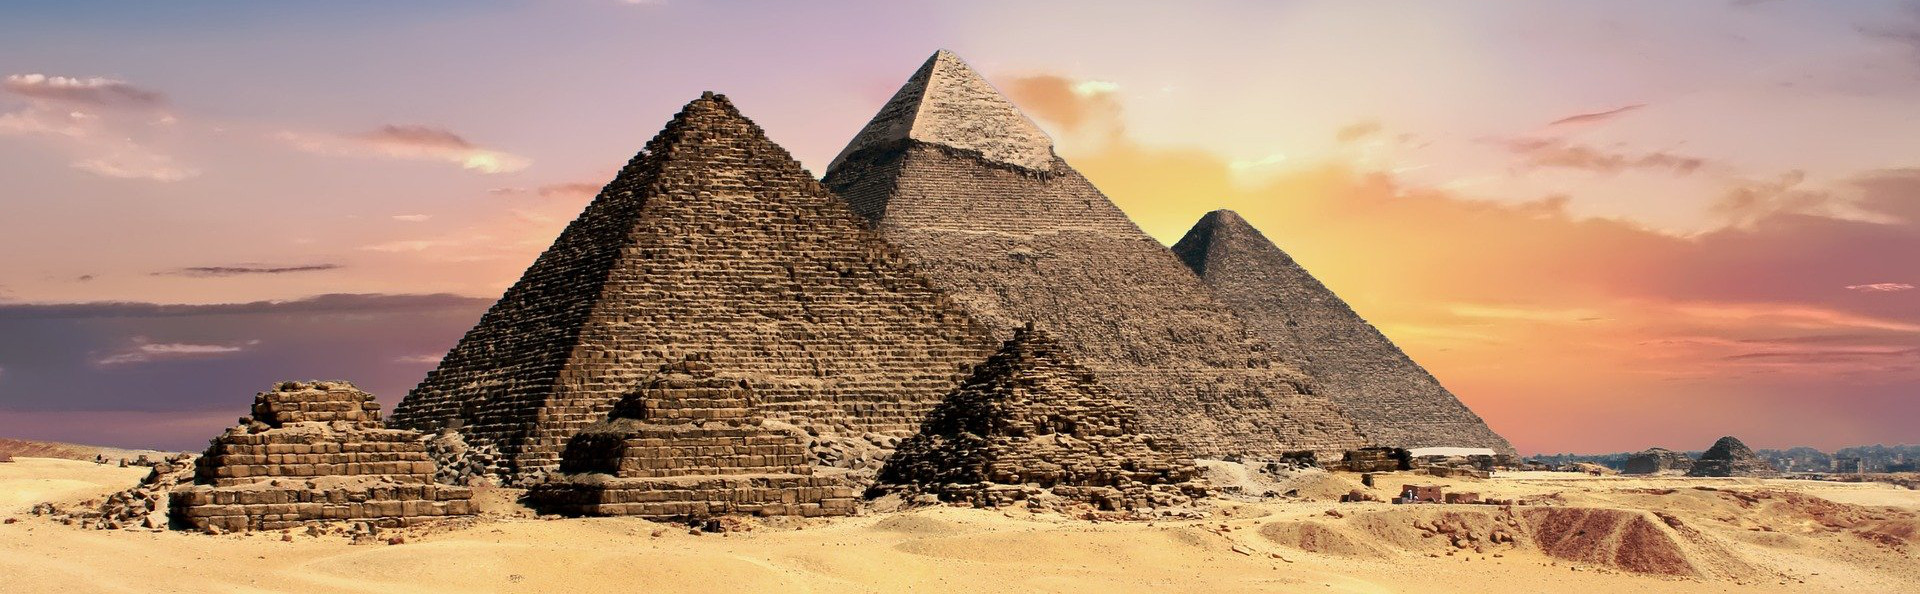 The Egyptian pyramids where the virtual escape room is set